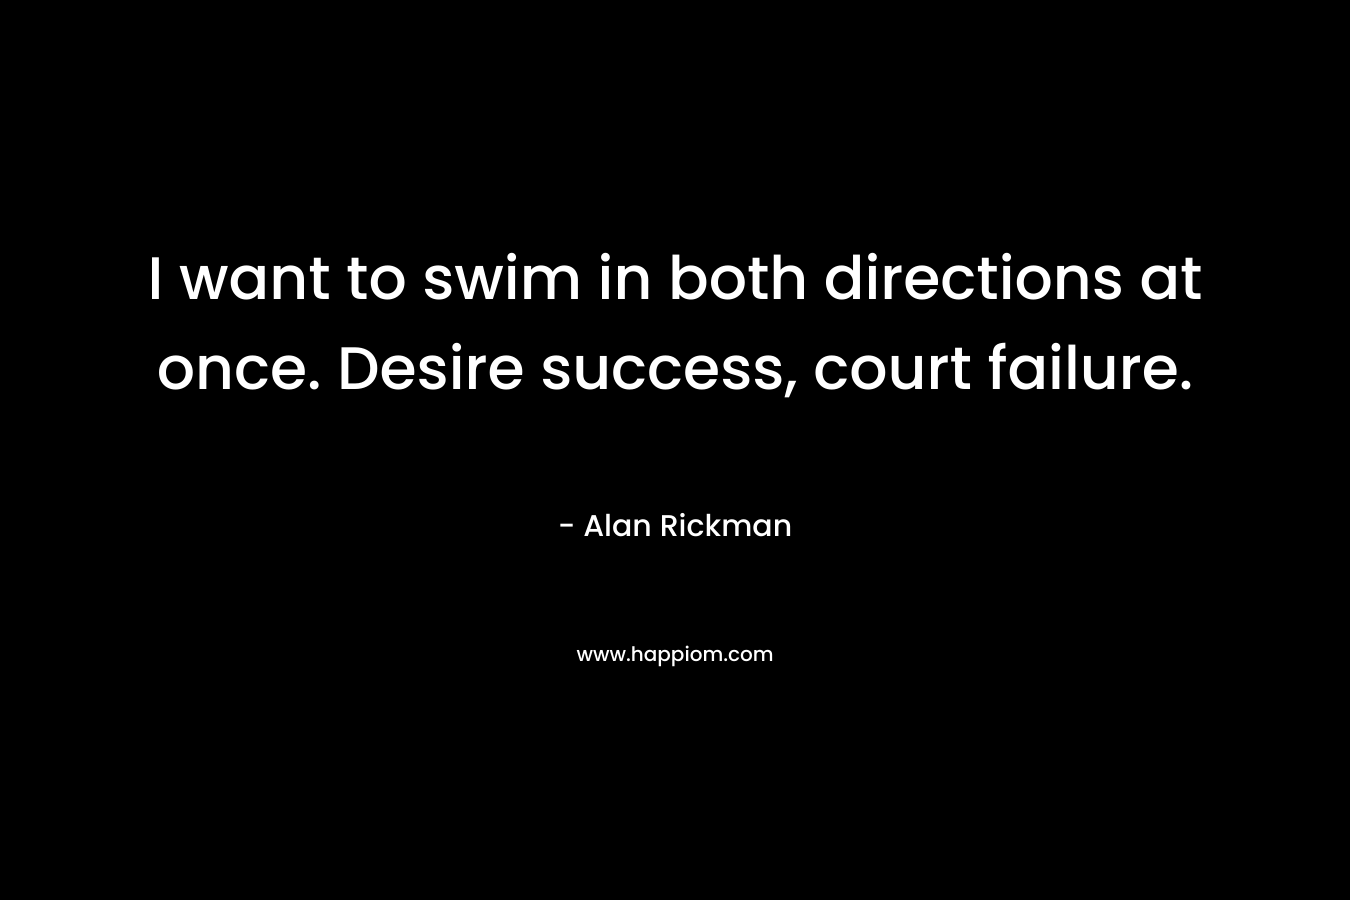 I want to swim in both directions at once. Desire success, court failure. – Alan Rickman